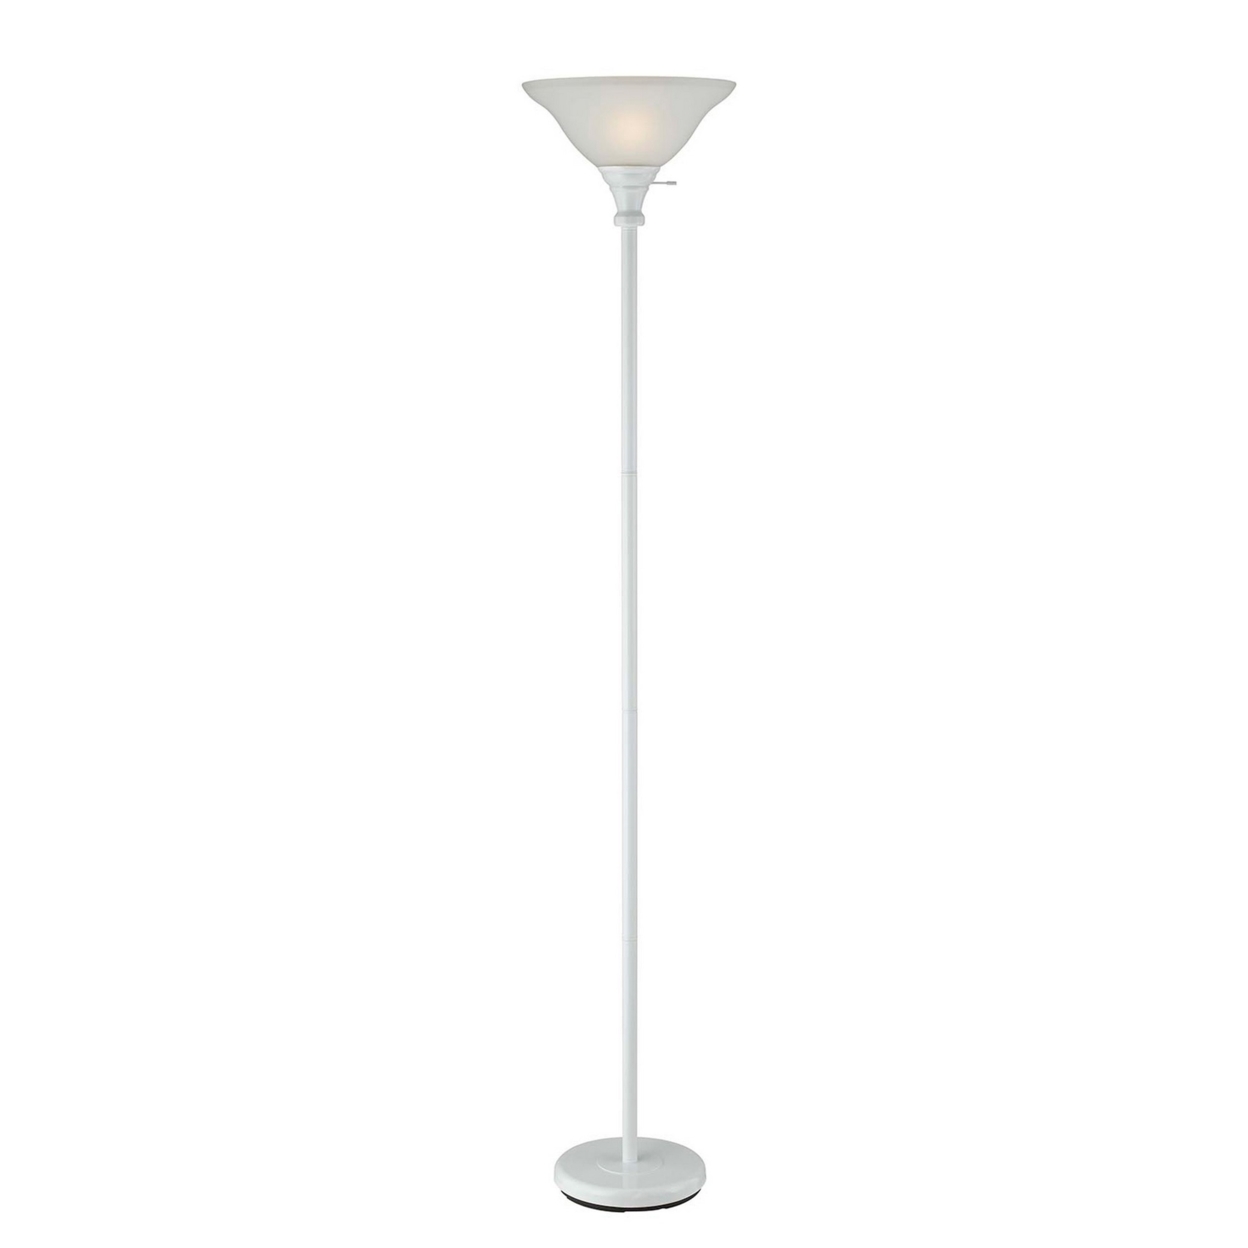 3 Way Torchiere Floor Lamp, Frosted Glass Shade, Sleek Base, White